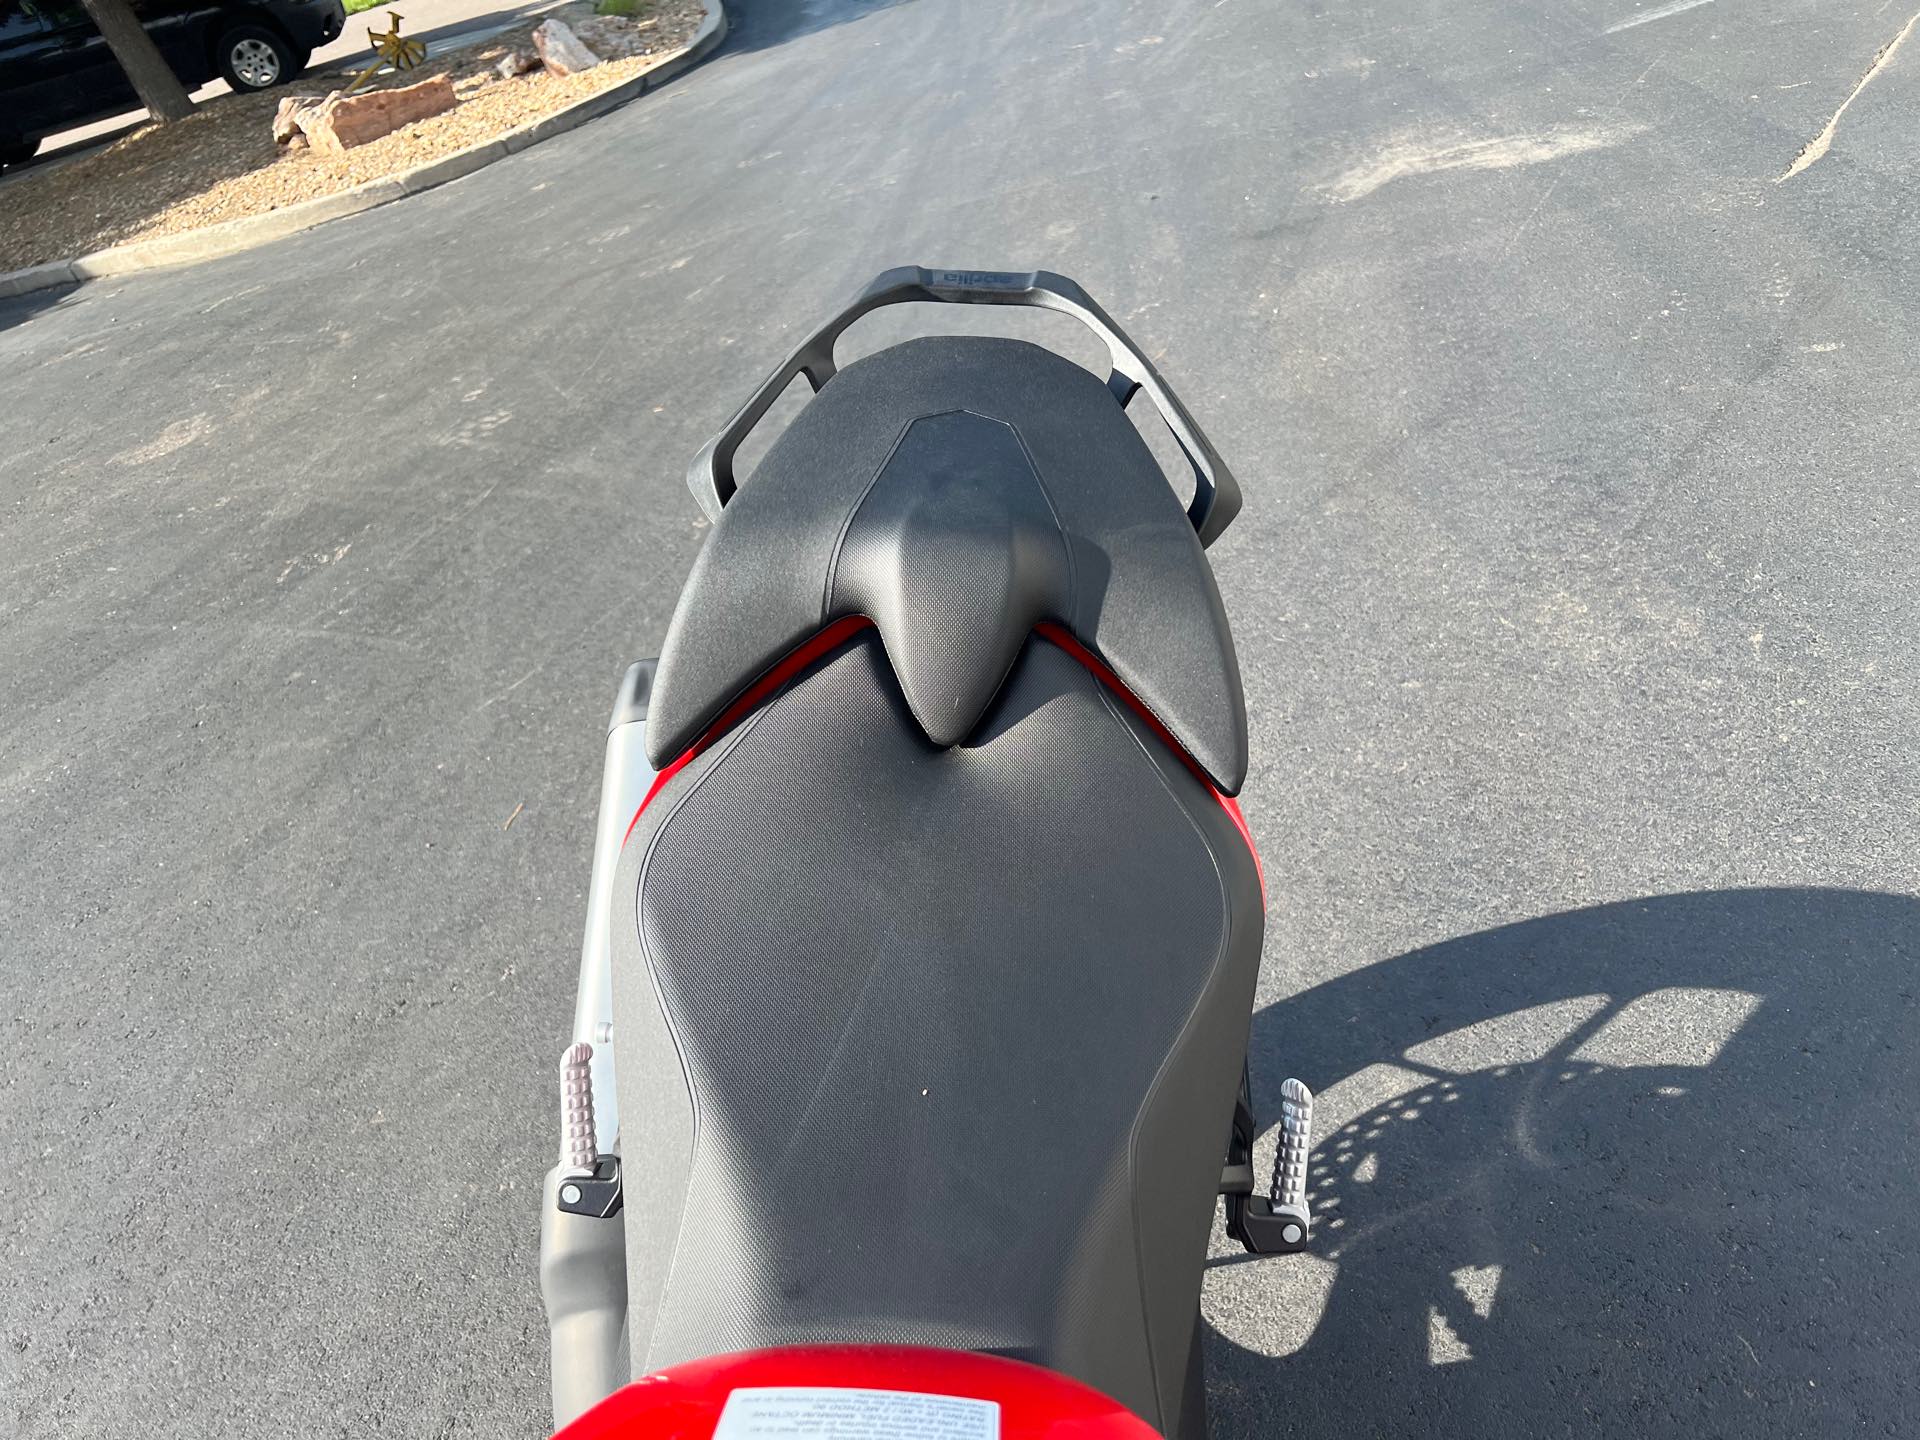 2023 Aprilia Tuono V4 1100 at Aces Motorcycles - Fort Collins